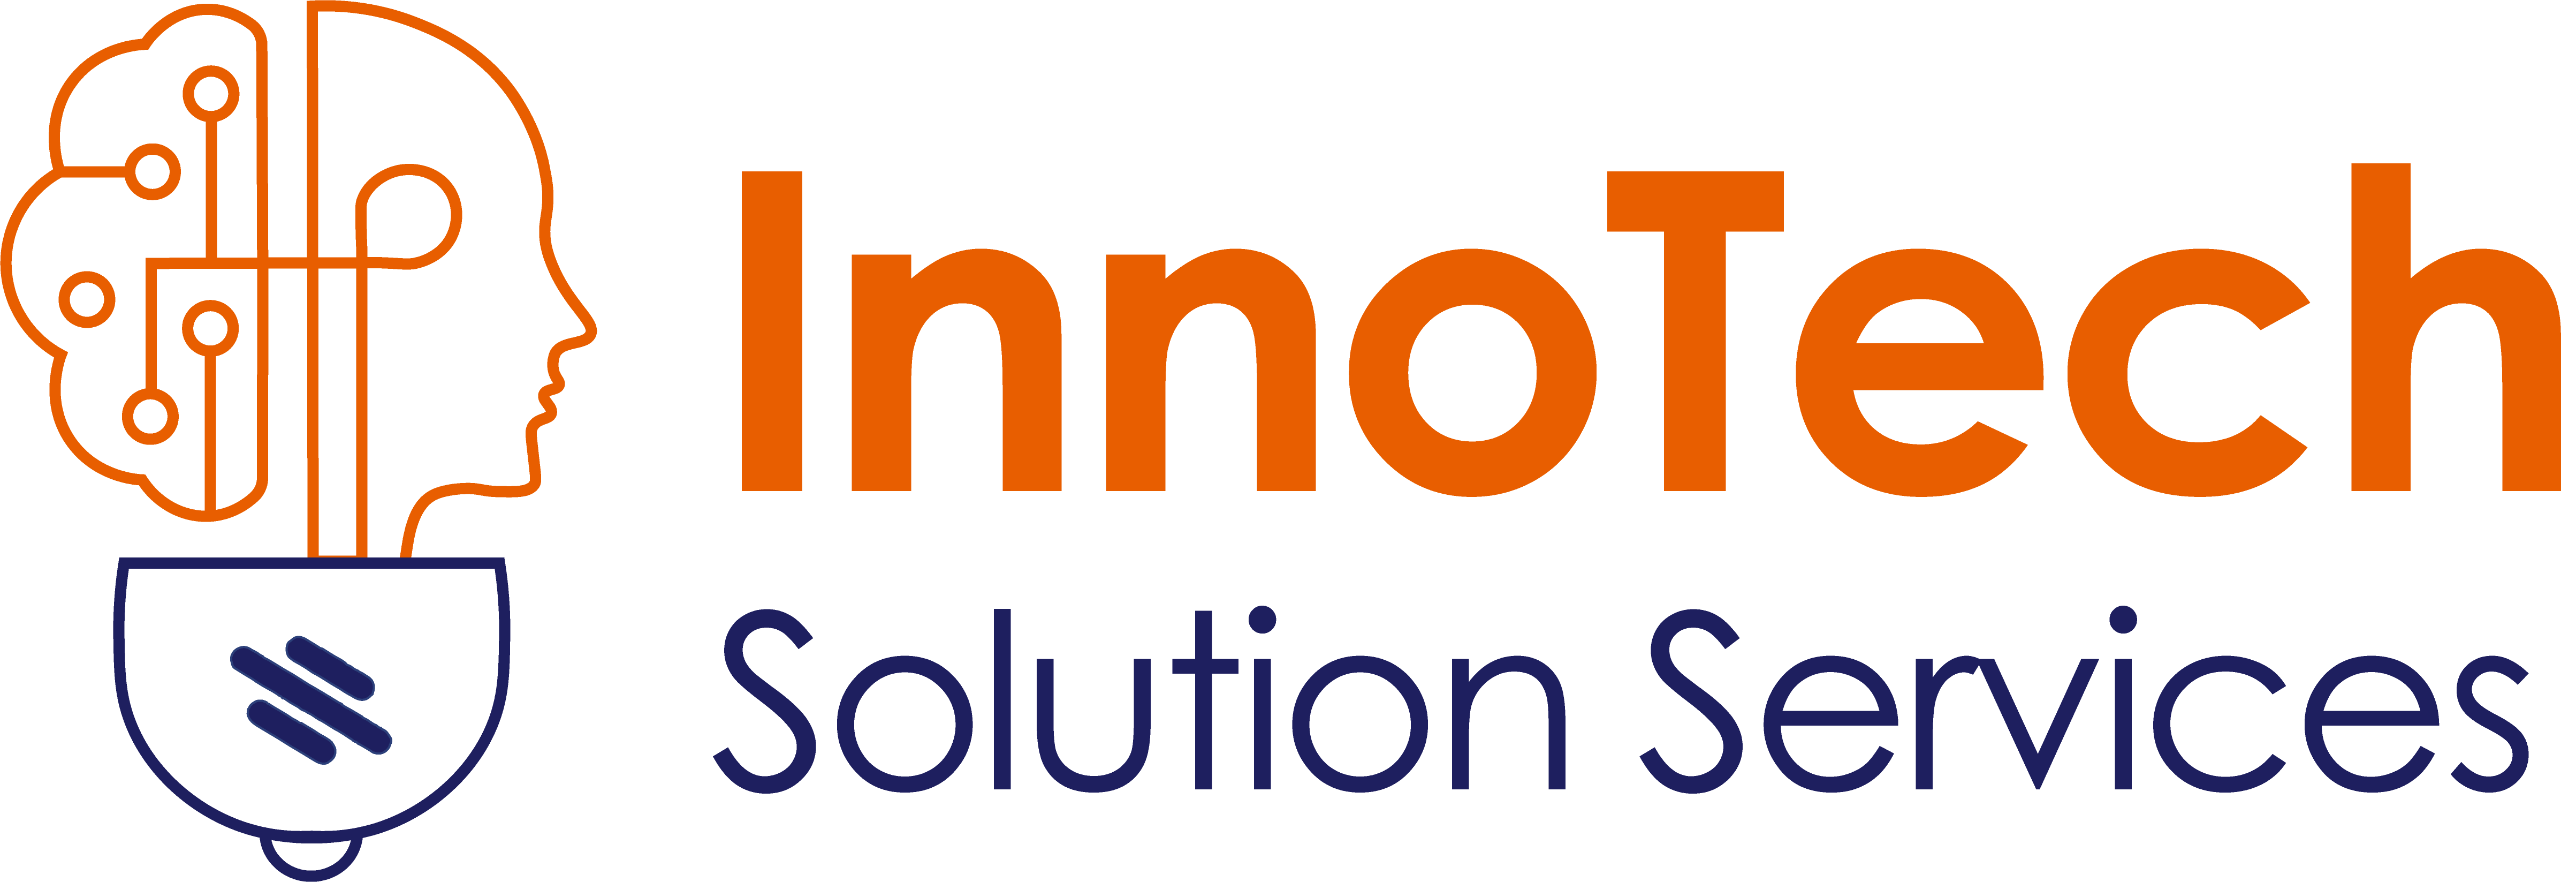 Innotech Solution Services